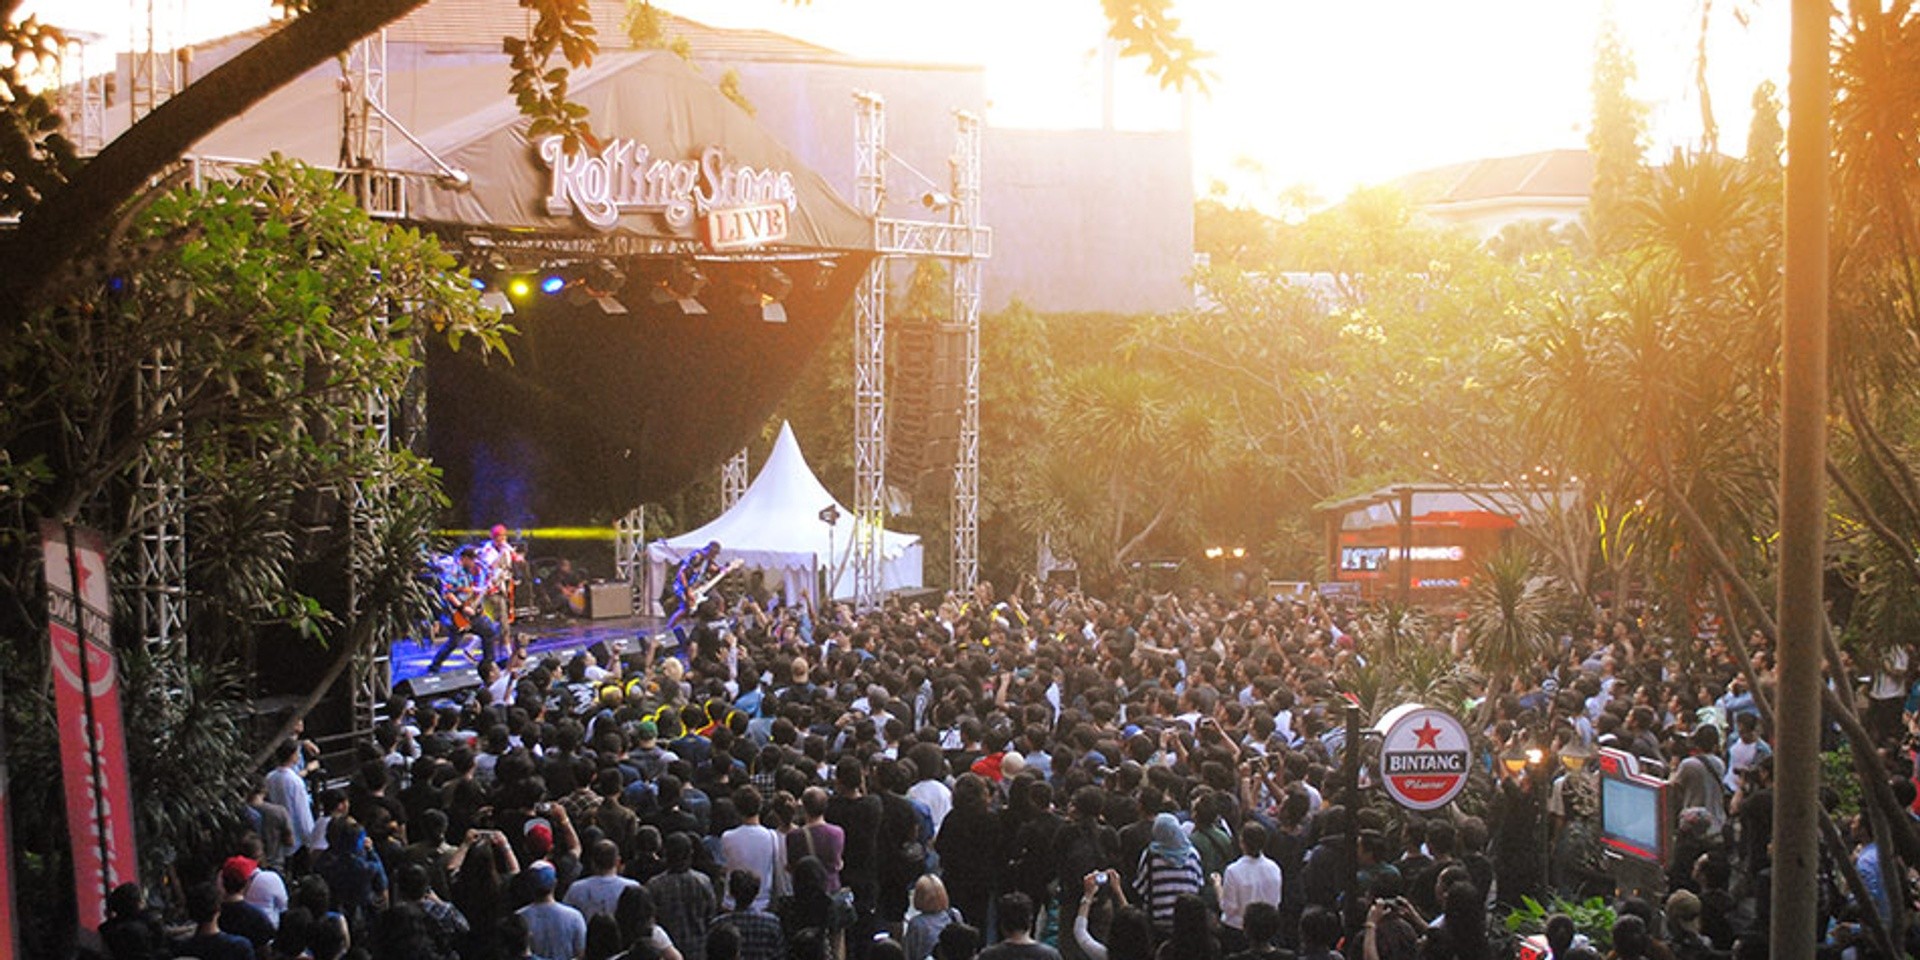 Rolling Stone Indonesia's 12th Anniversary to feature The SIGIT, Scaller, Barasuara and more